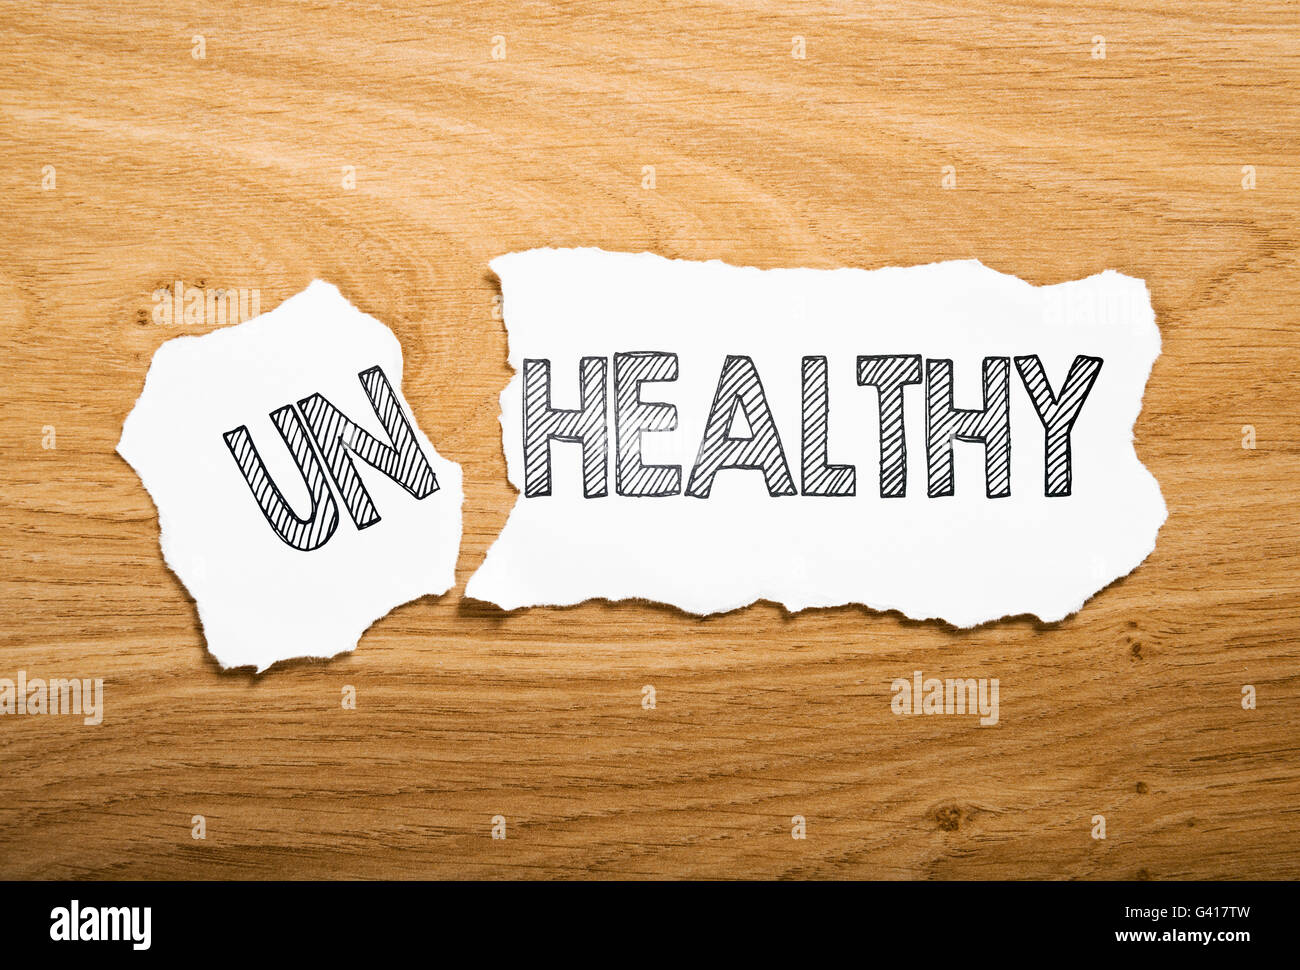 healthy or unhealthy: two pieces torn paper with opposite messages Stock Photo